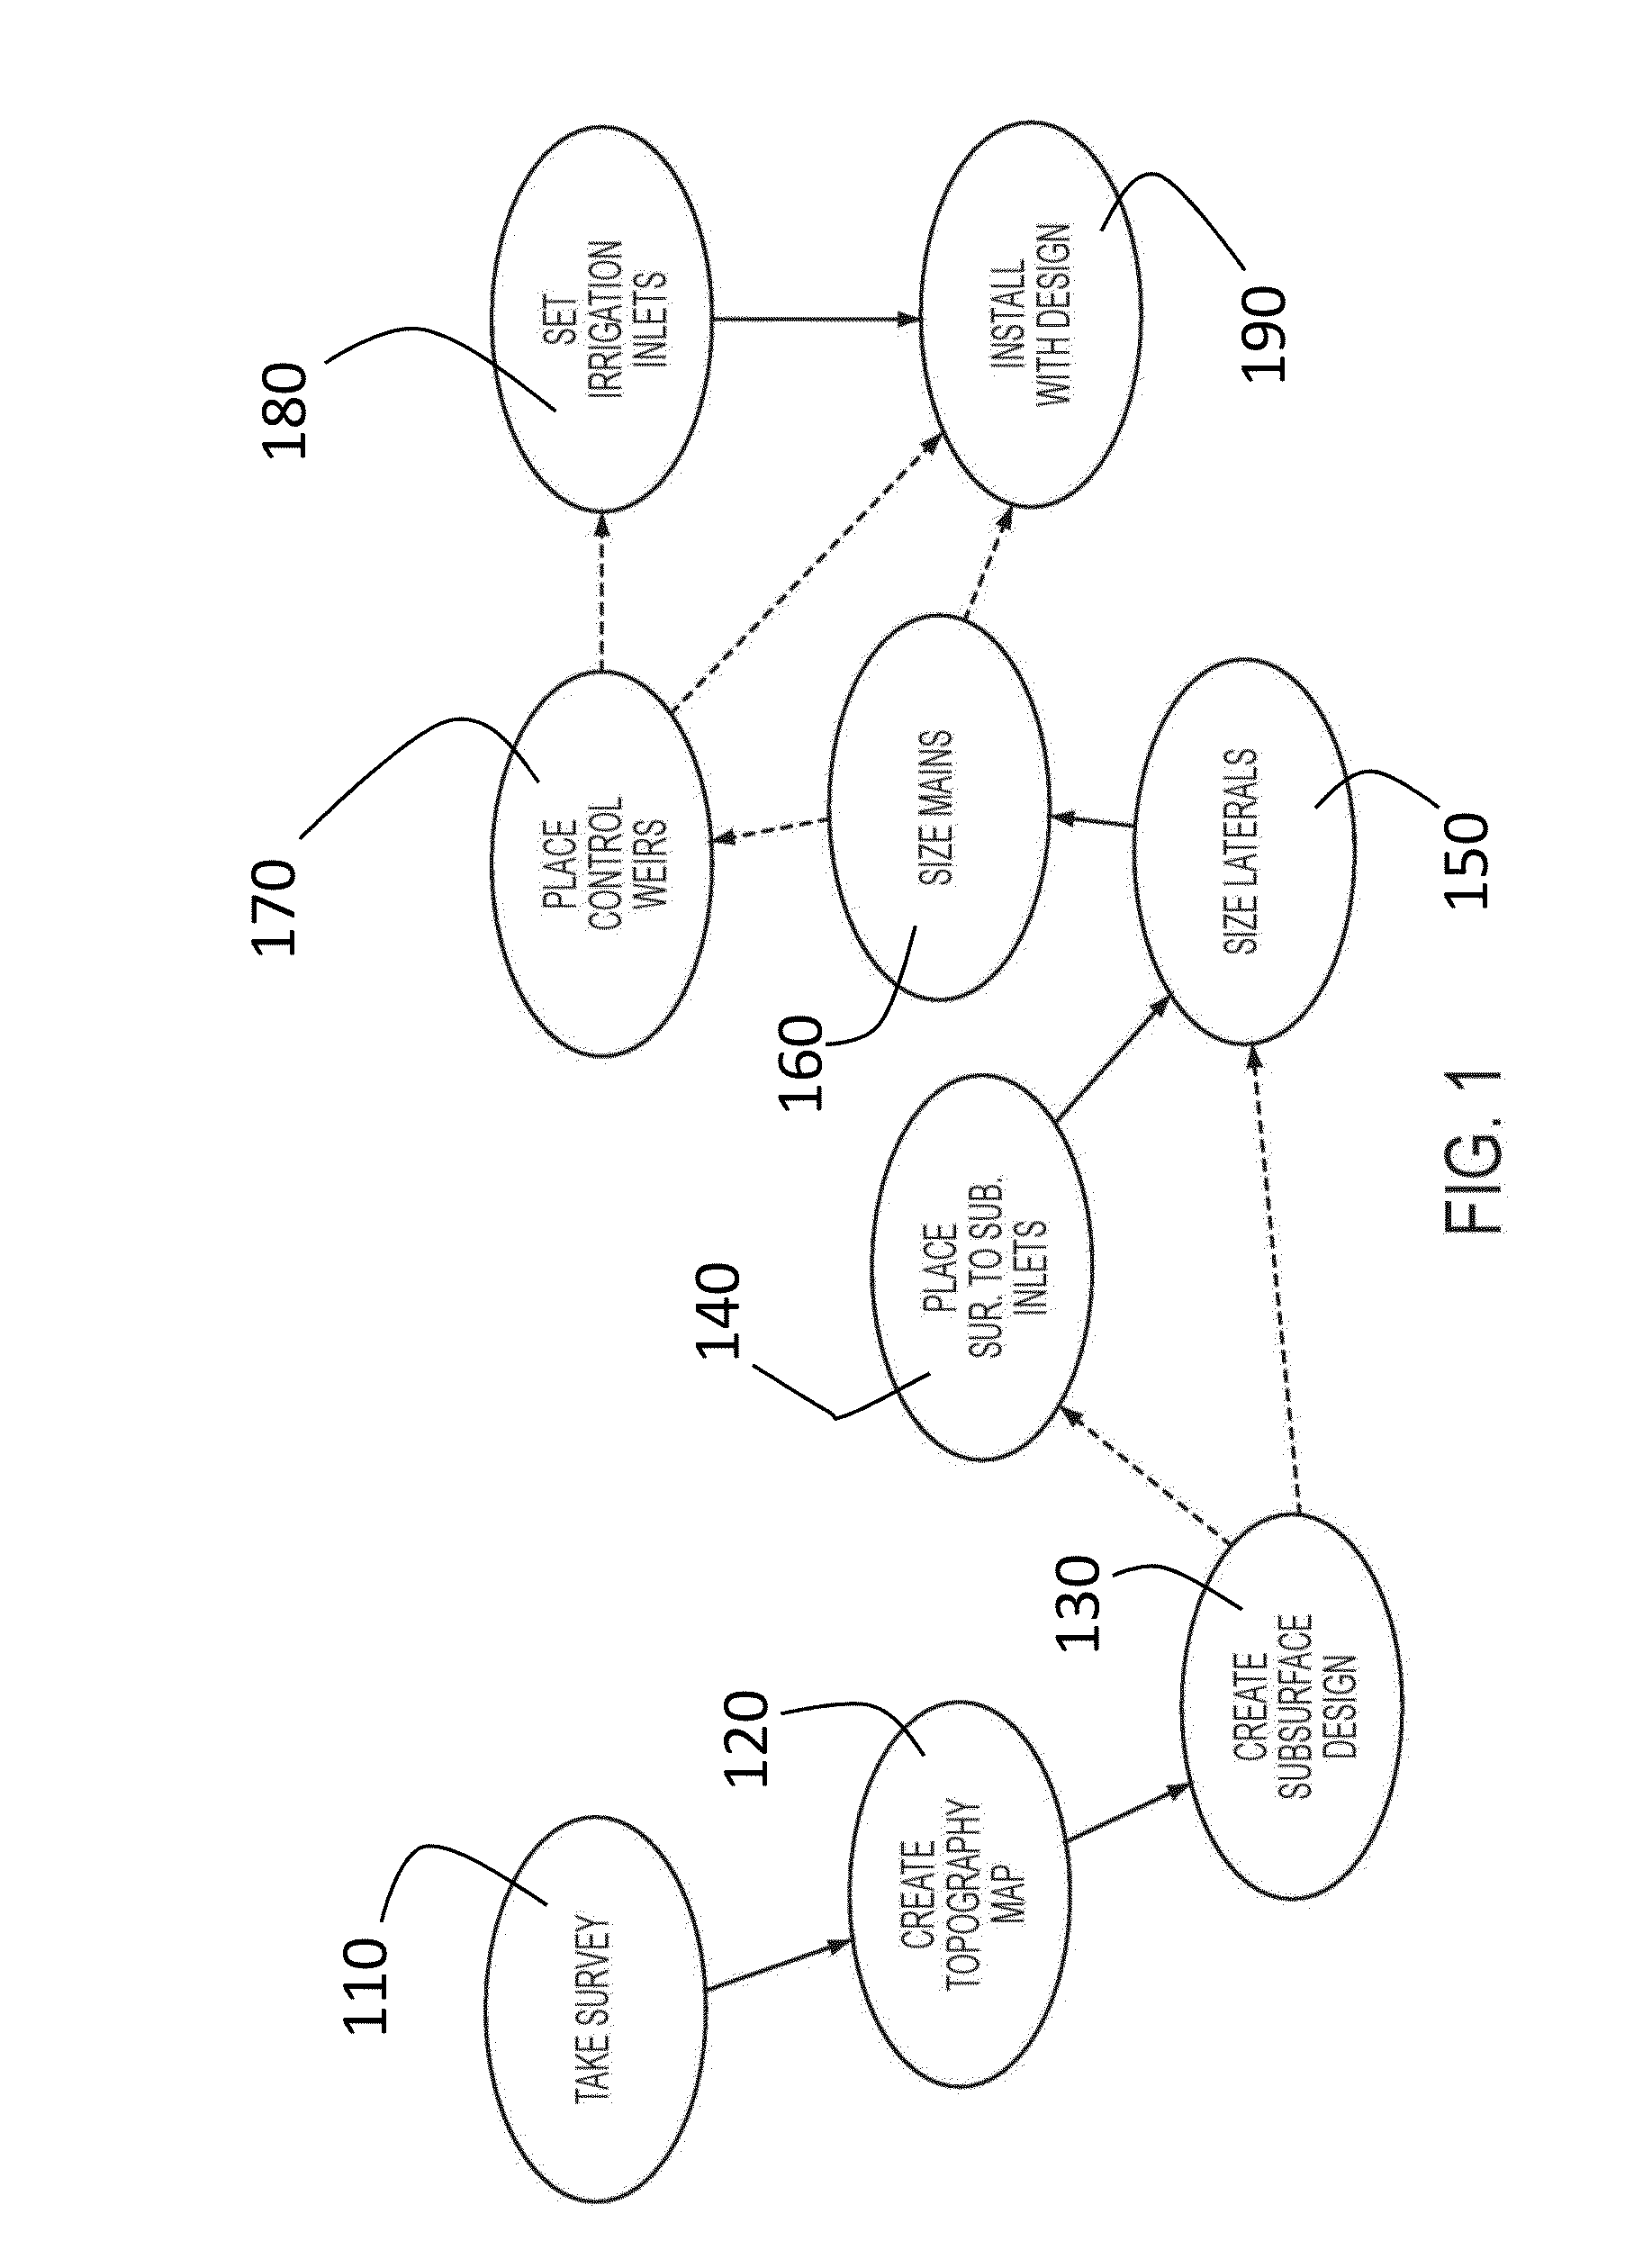 System And Method For Design Of Subsurface Drainage Systems Incorporating Control Weirs, Surface To Subsurface Inlets, And Irrigation Inlets